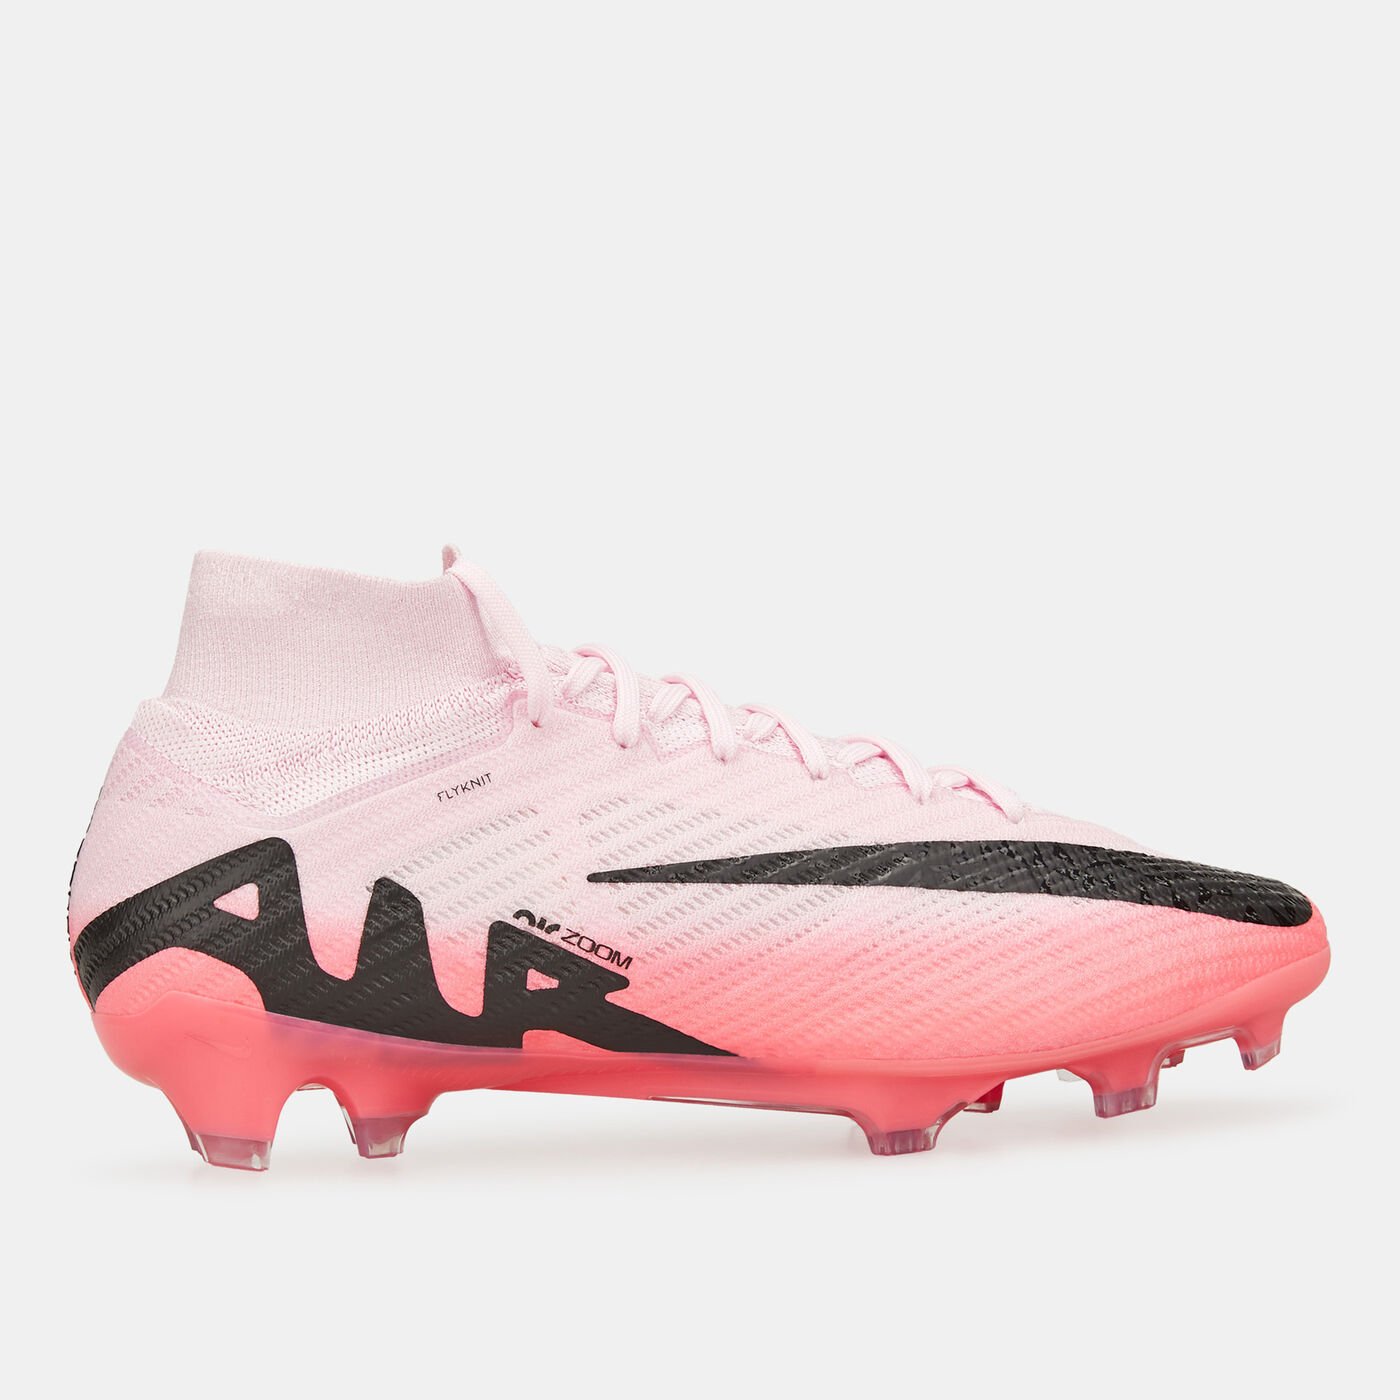 Men's Mercurial Superfly 9 Elite Firm-Ground Football Shoes